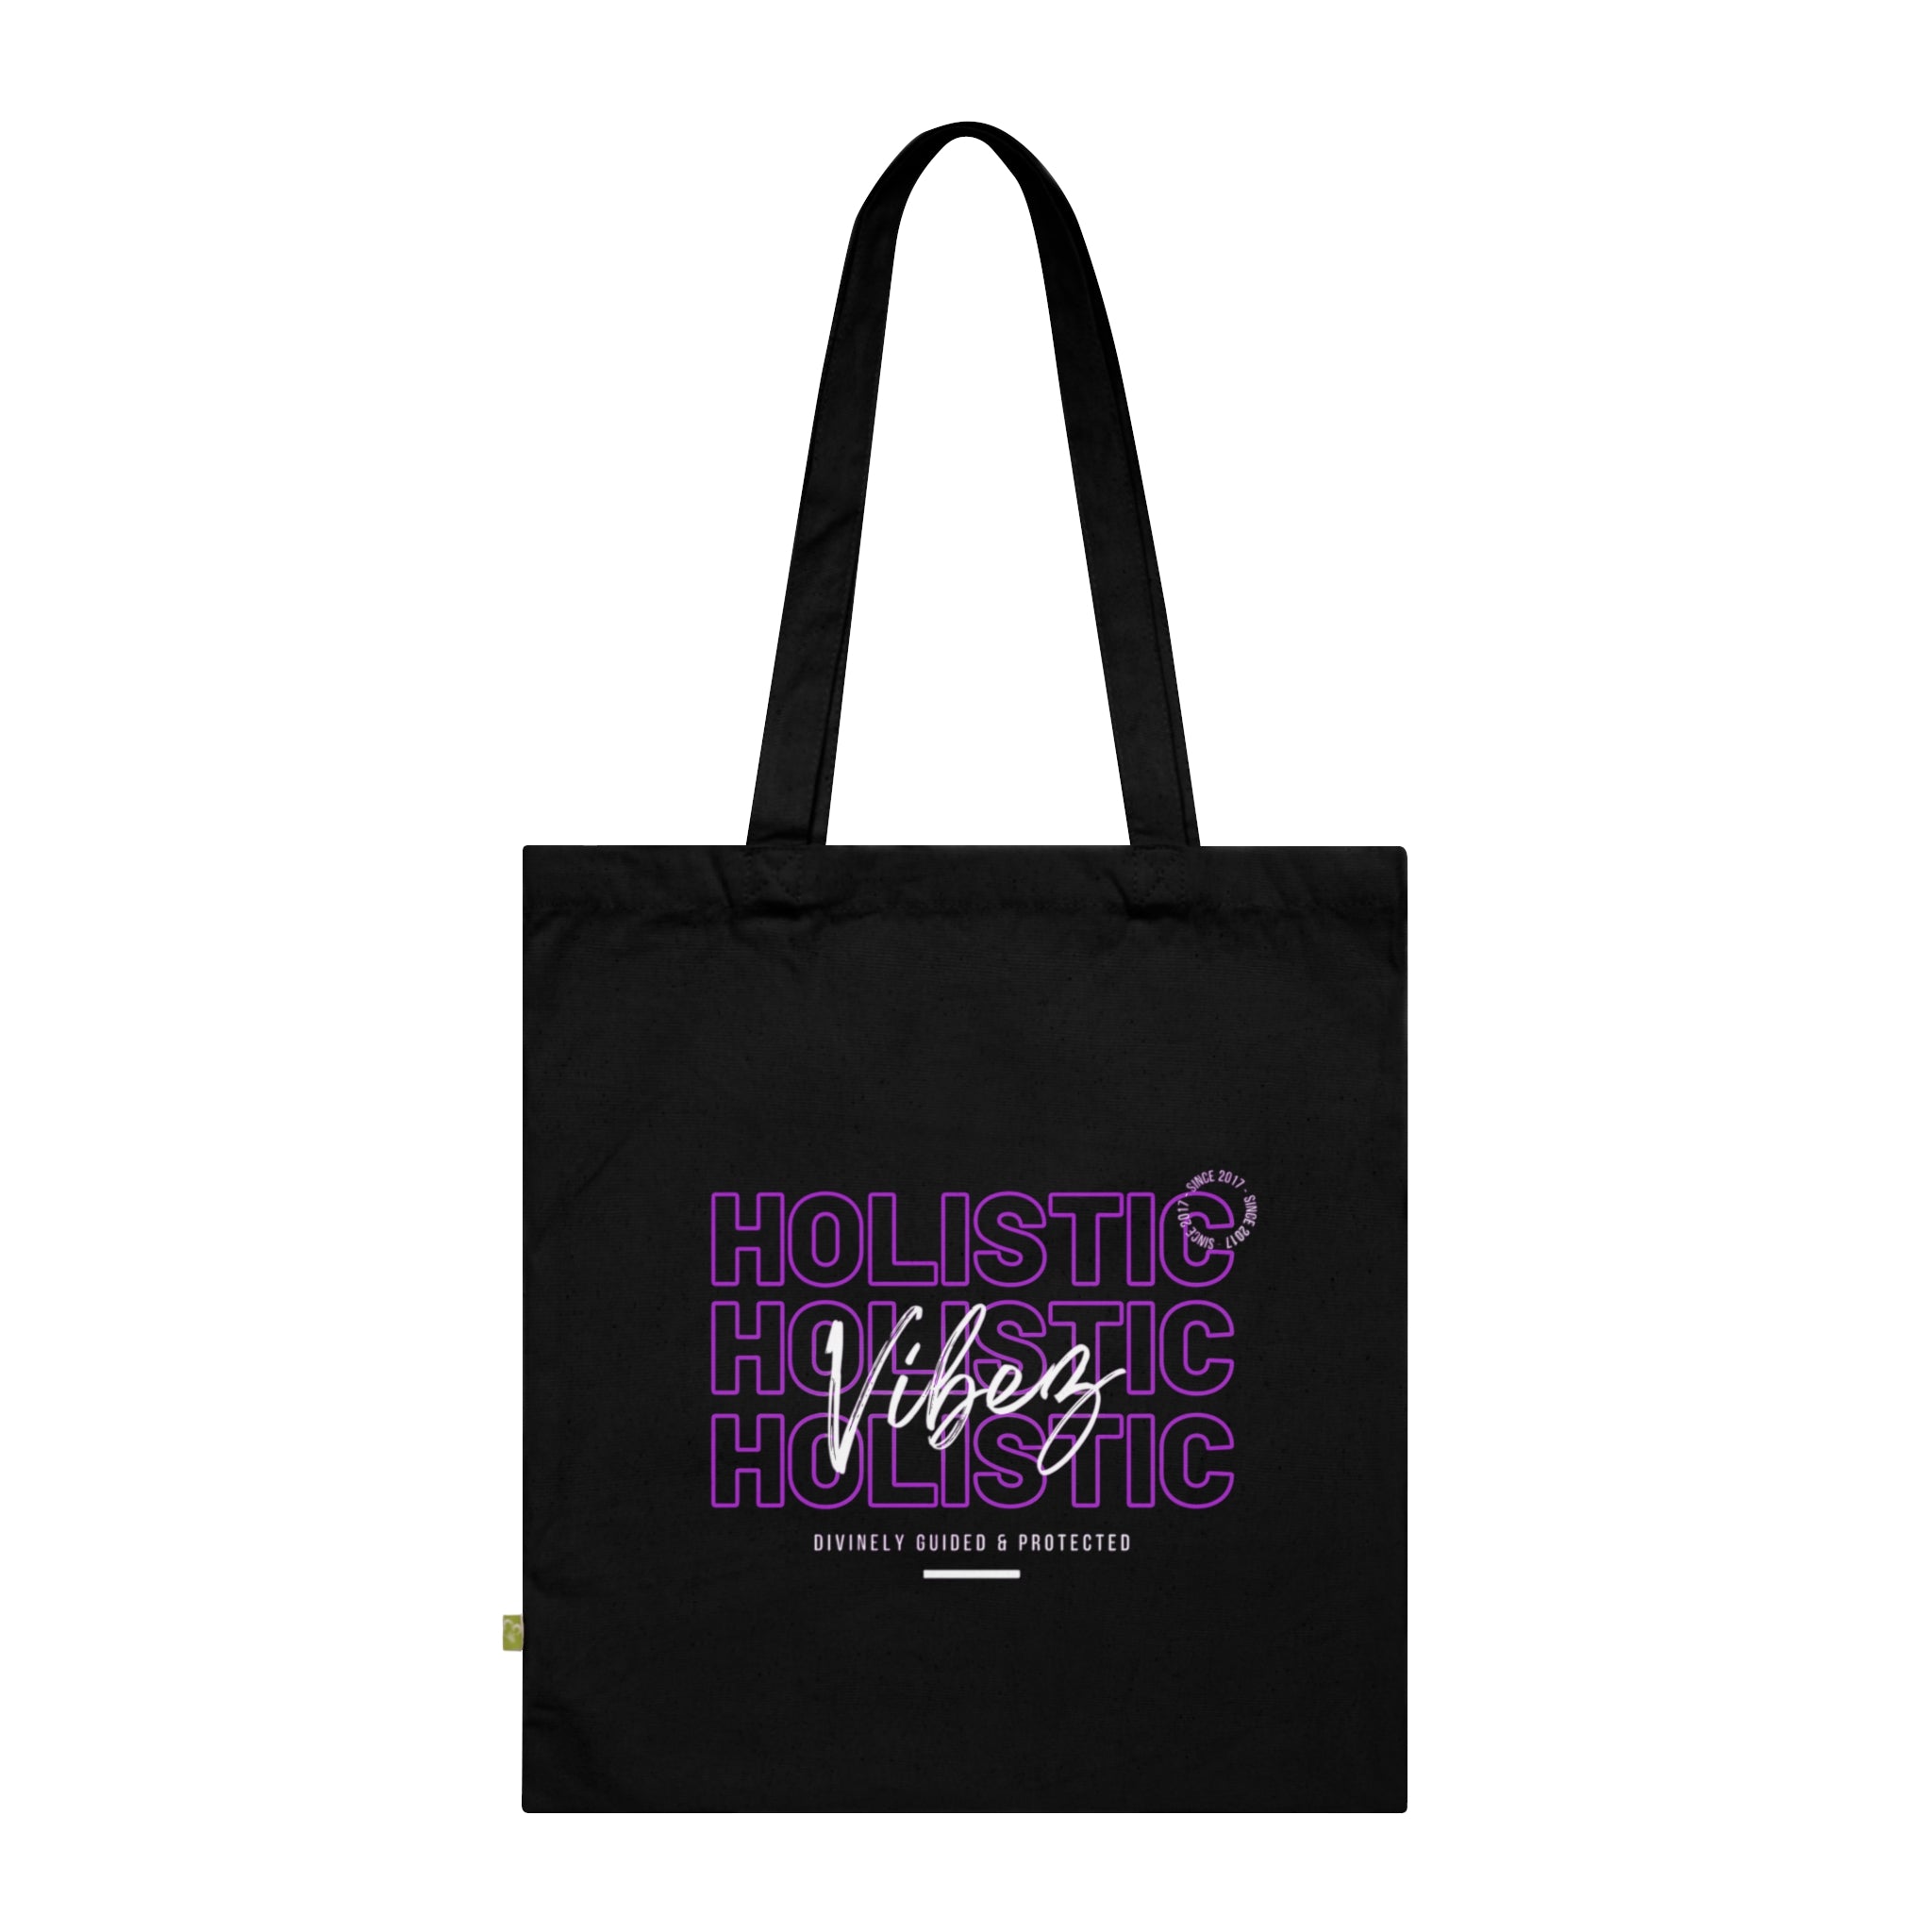 Since 2017 Tote Bag